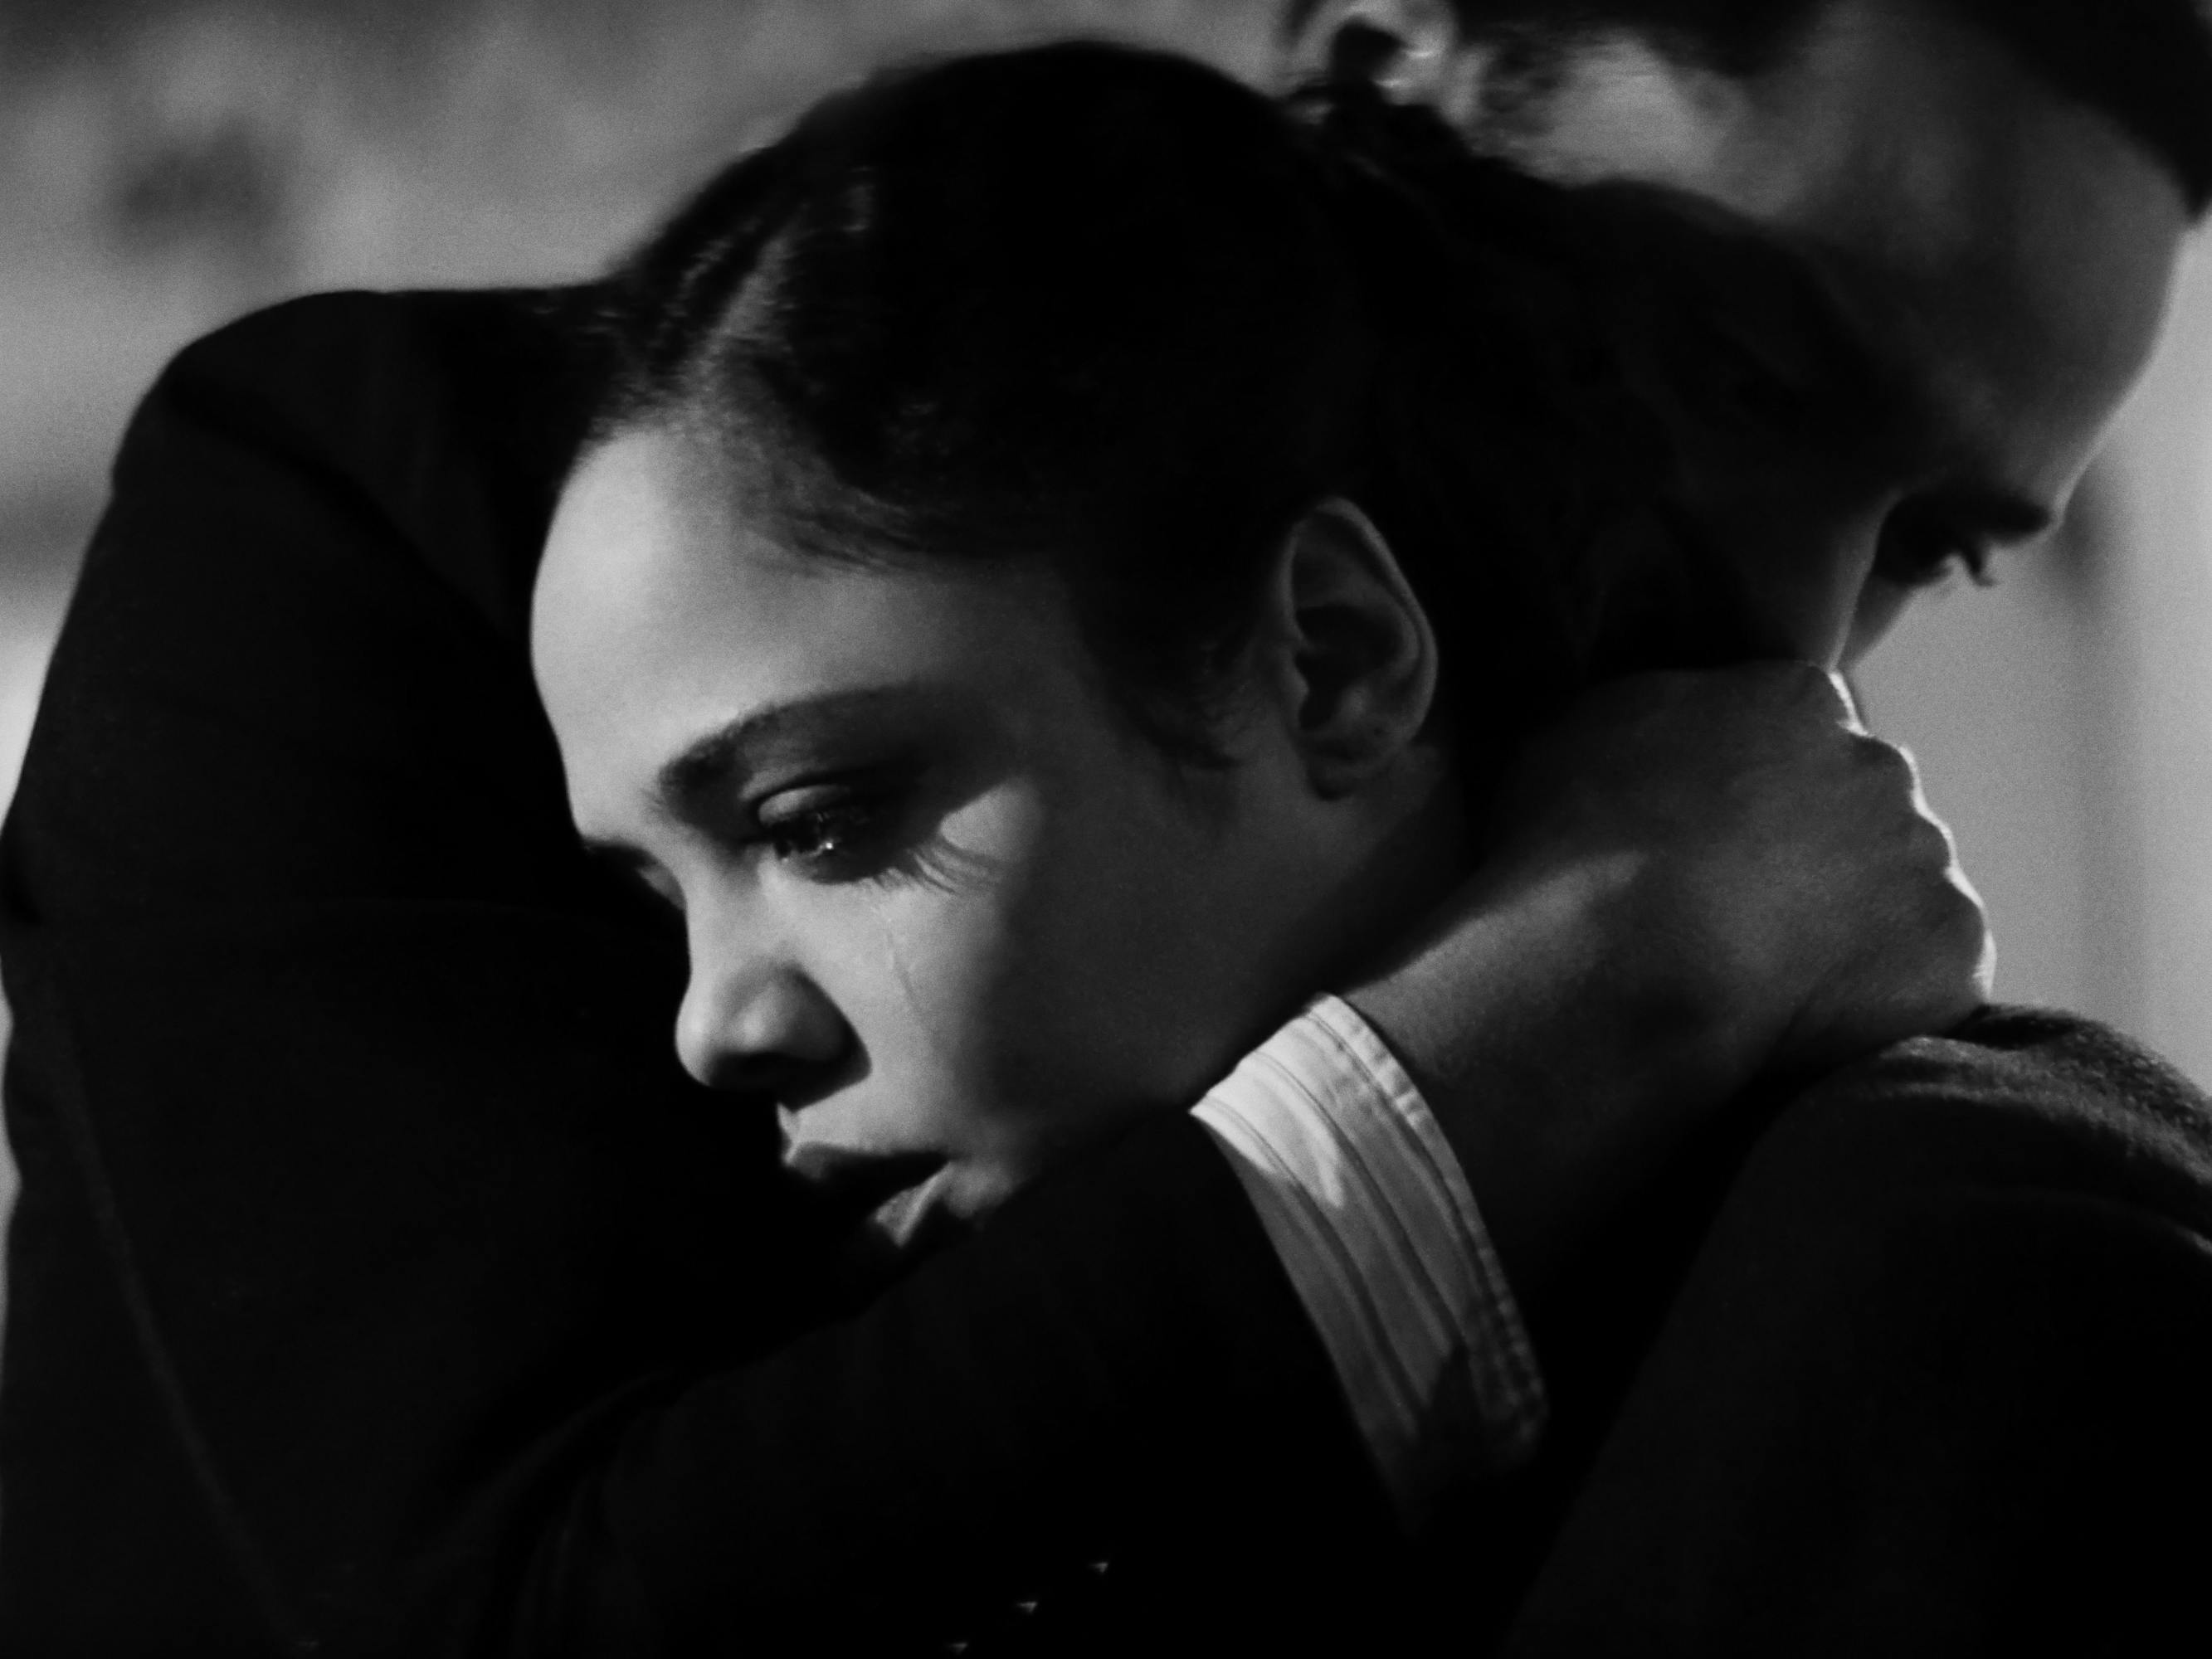 André Holland and Tessa Thompson embrace in this black and white shot. Thompson looks desolate.